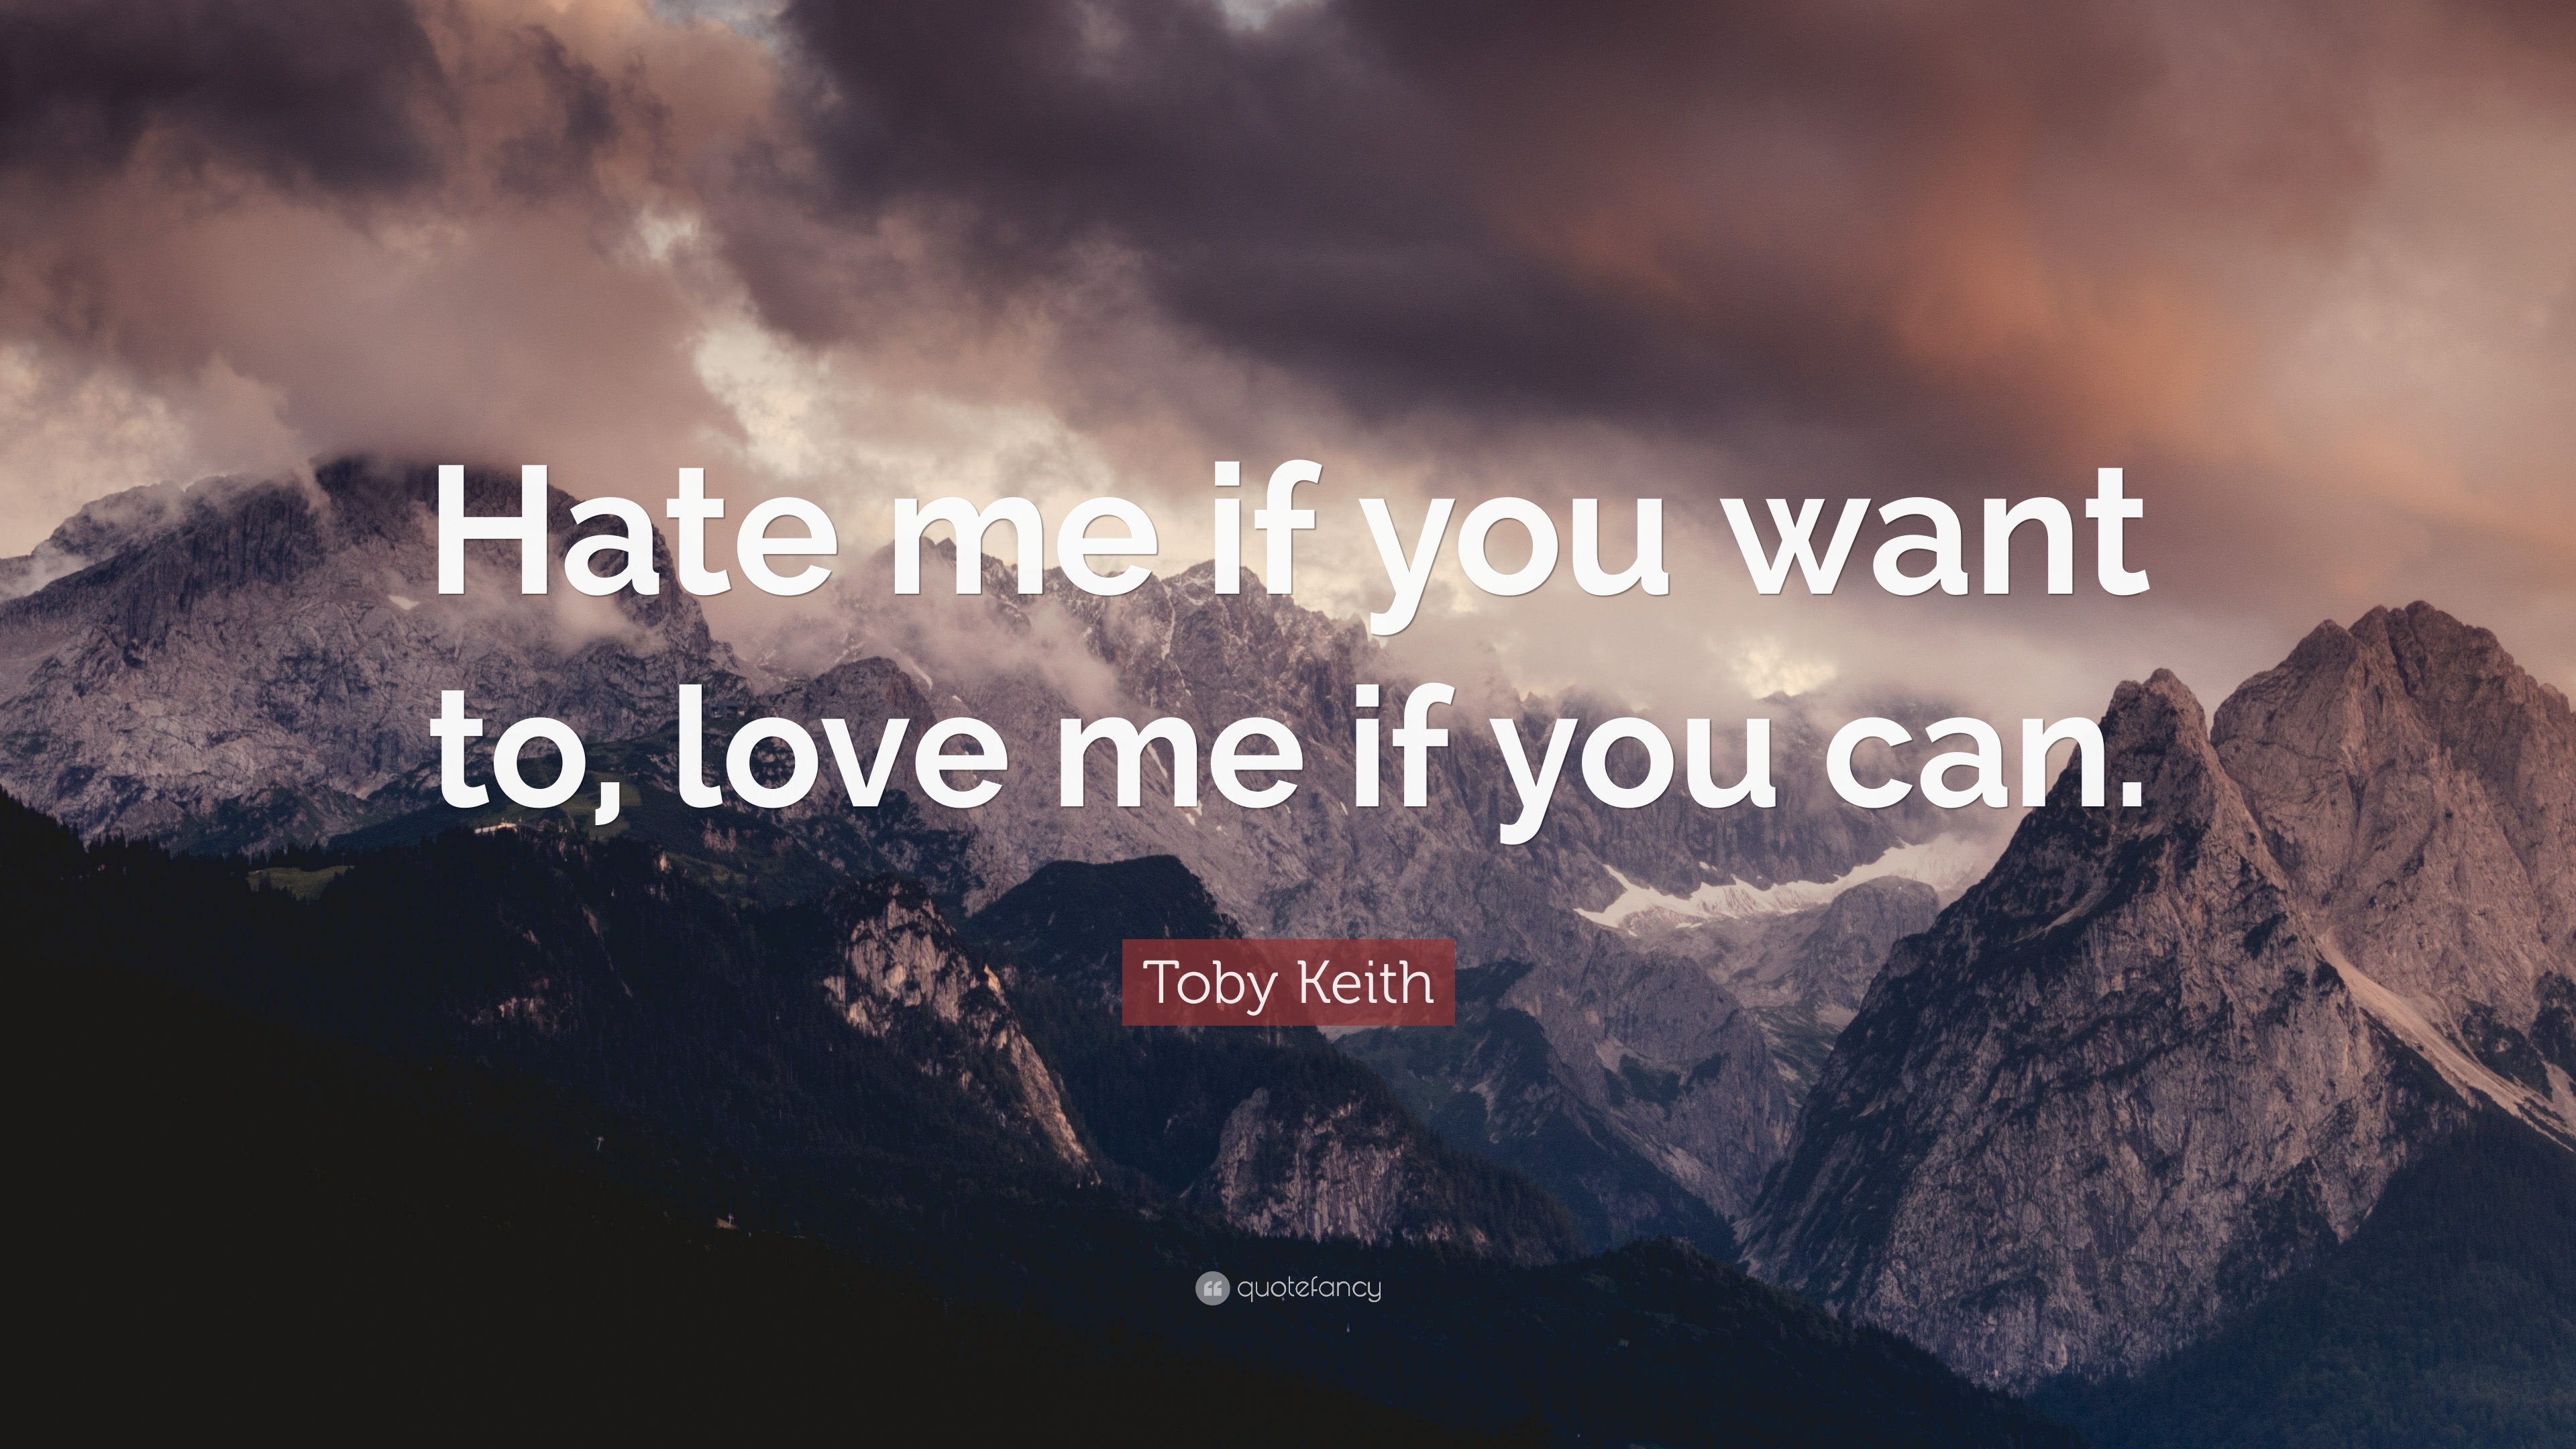 Toby Keith Quote “Hate me if you want to love me if you